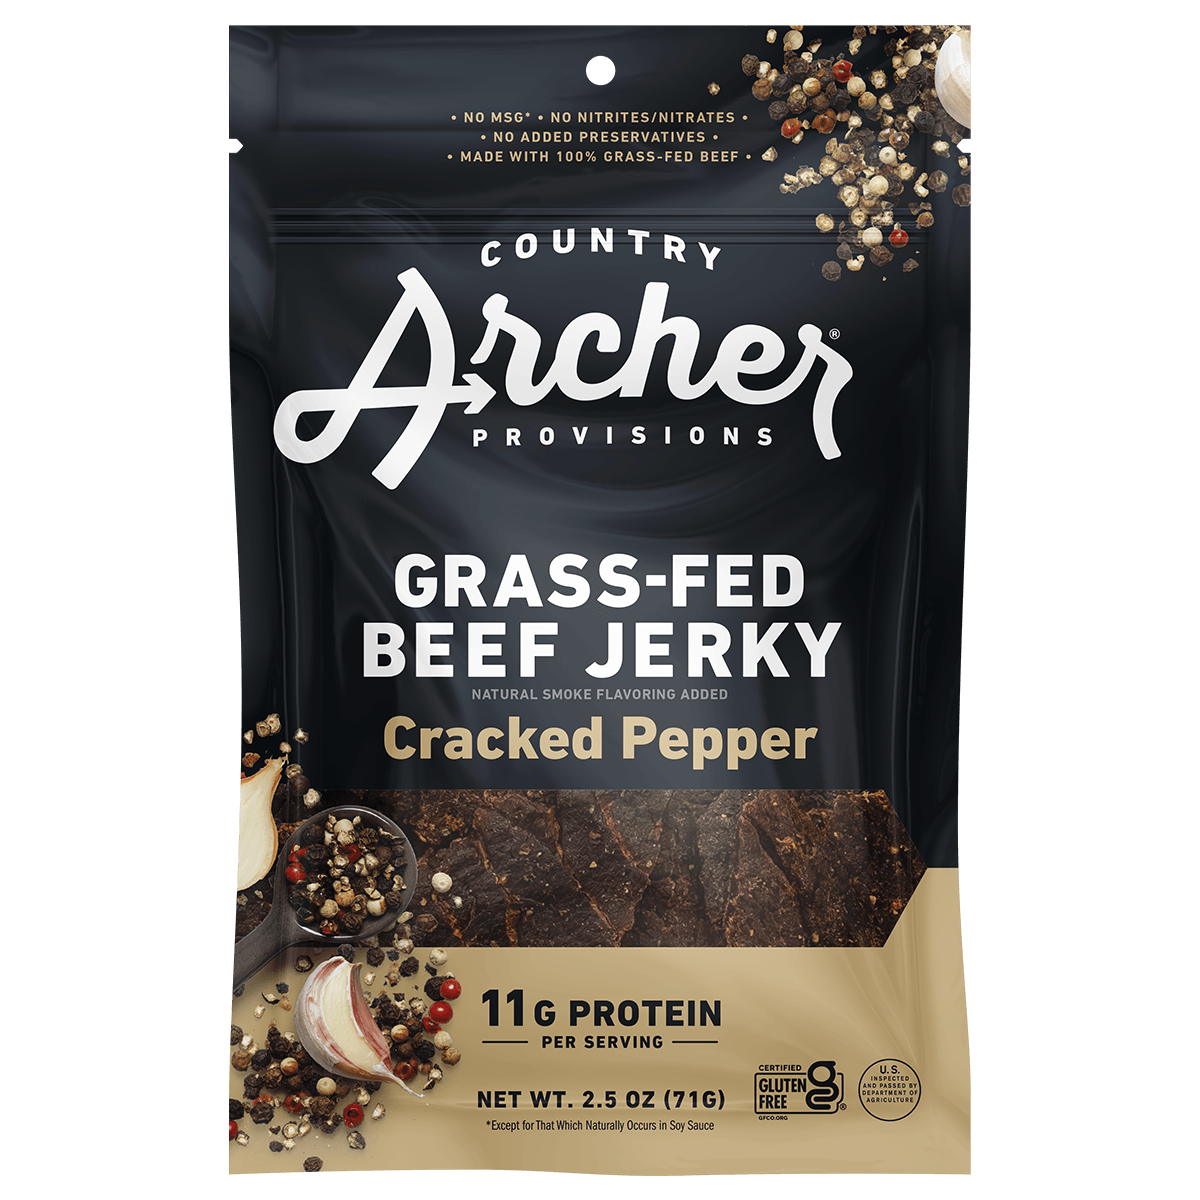  Cracked Pepper Beef Jerky by Country Archer, 3-Pack (3 x 2.5oz bags), Beef - Beef Jerky - Gluten-Free - Grass Fed Beef - High Protein - Jerky - Jerky_Day_Promo - No Preservatives - Organic Ingredients - Original L, cracked-pepper-beef-jerky, , 3-Pack (3 x 2.5oz bags)